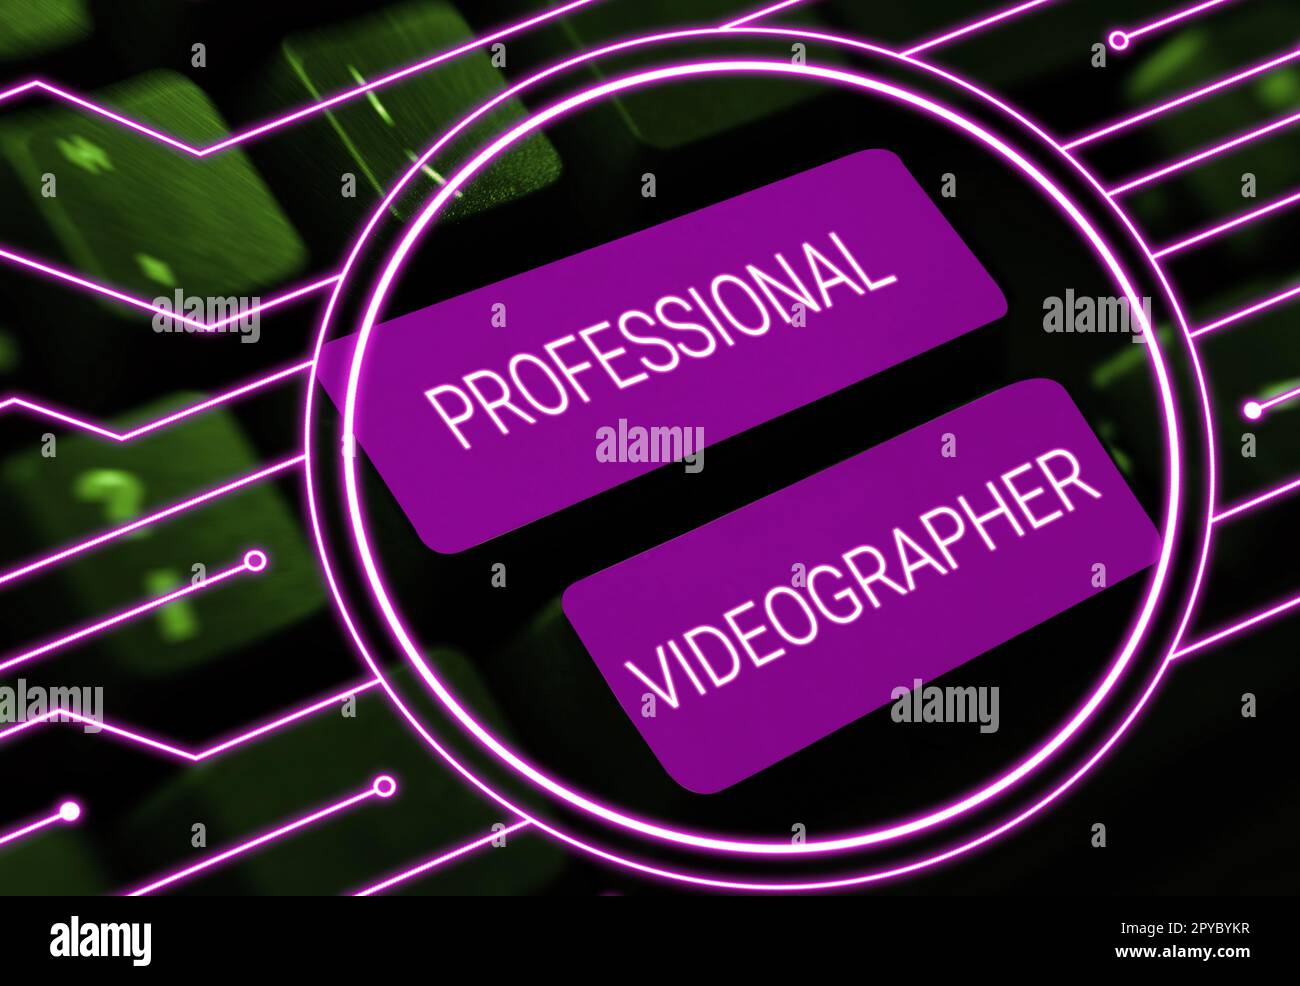 Writing displaying text Professional Videographer. Word for Filmmaking Images digitally recorded by an expert Stock Photo